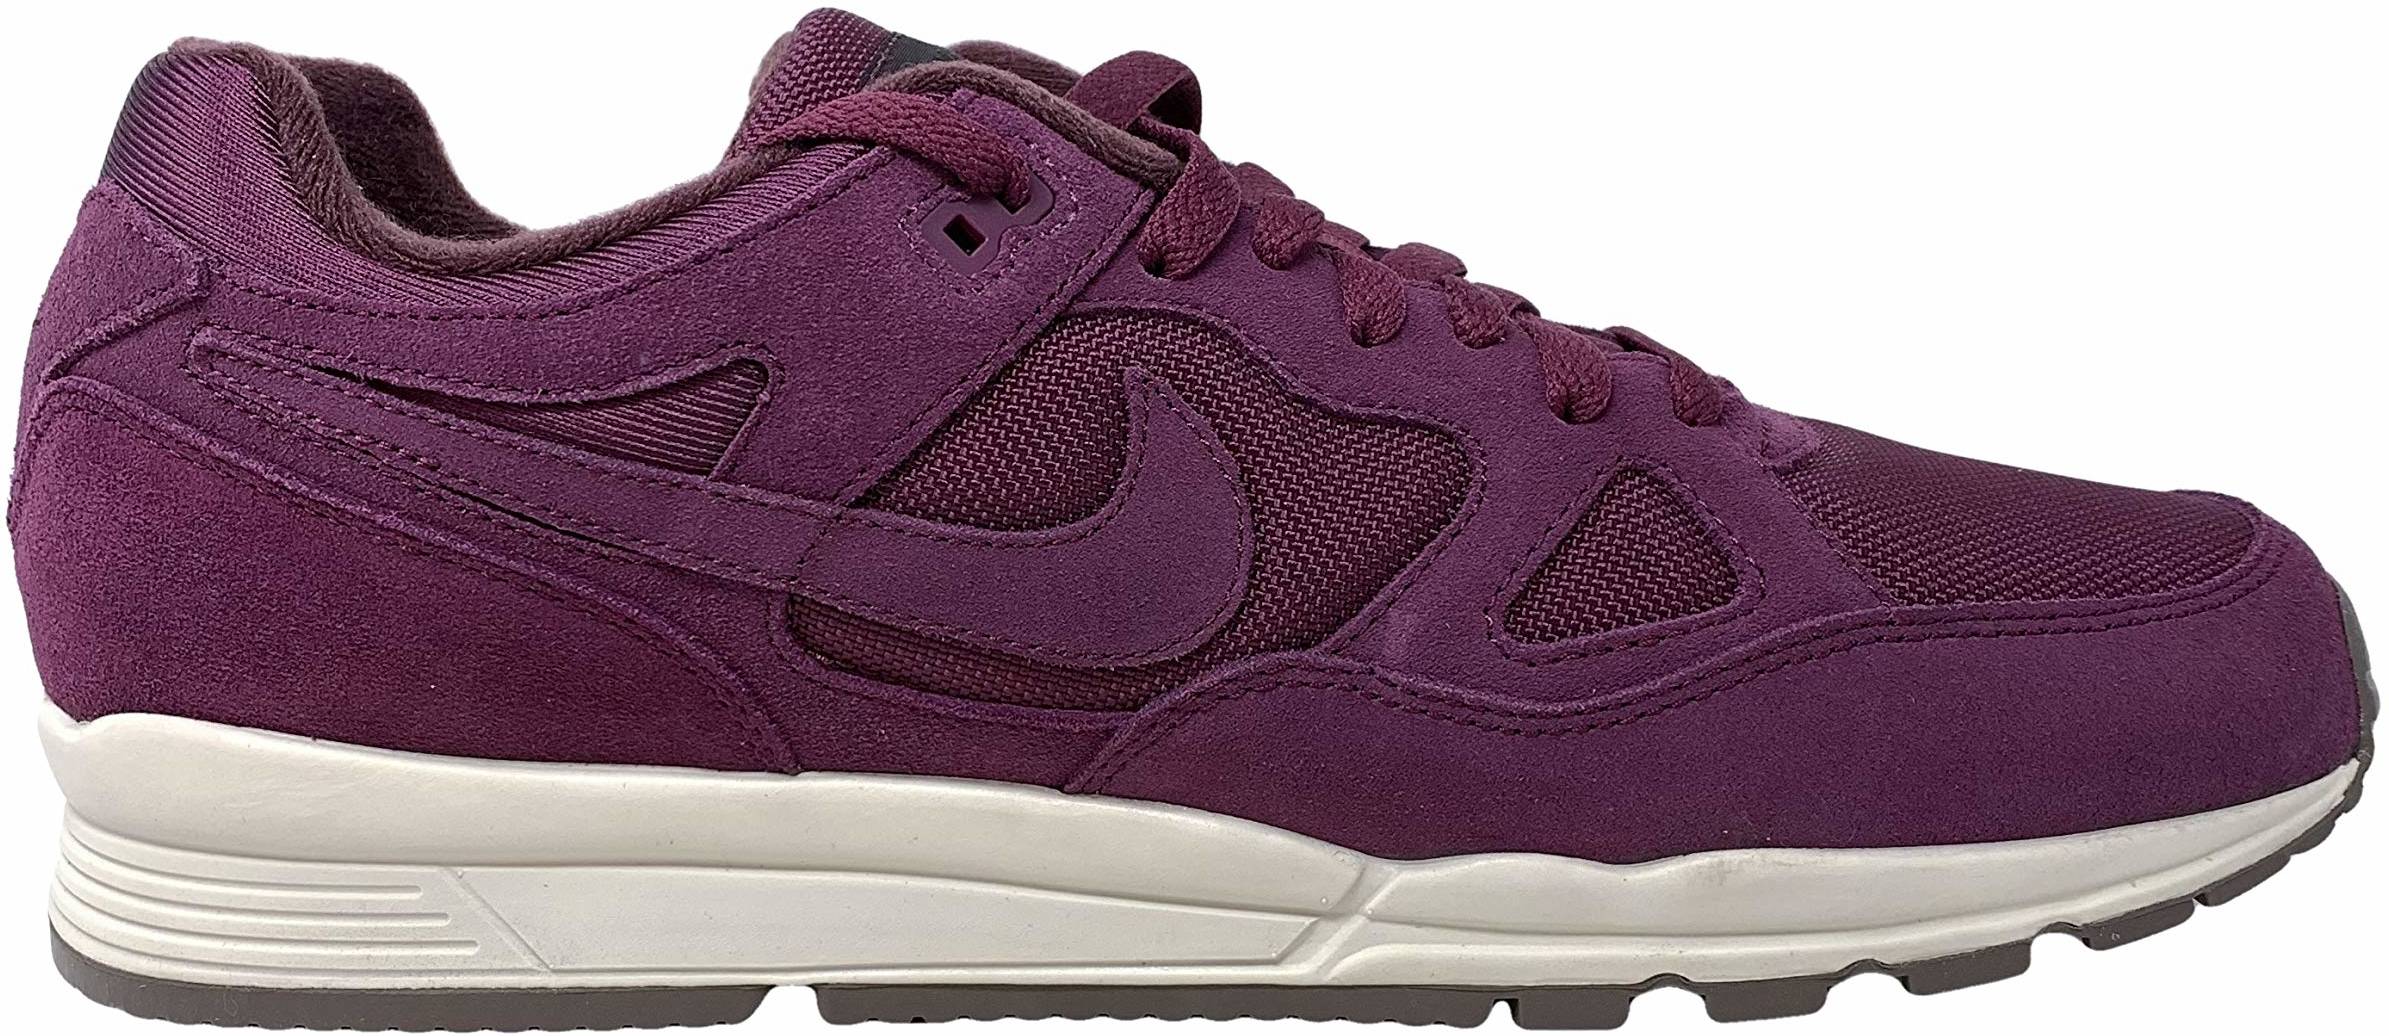 purple and grey nikes